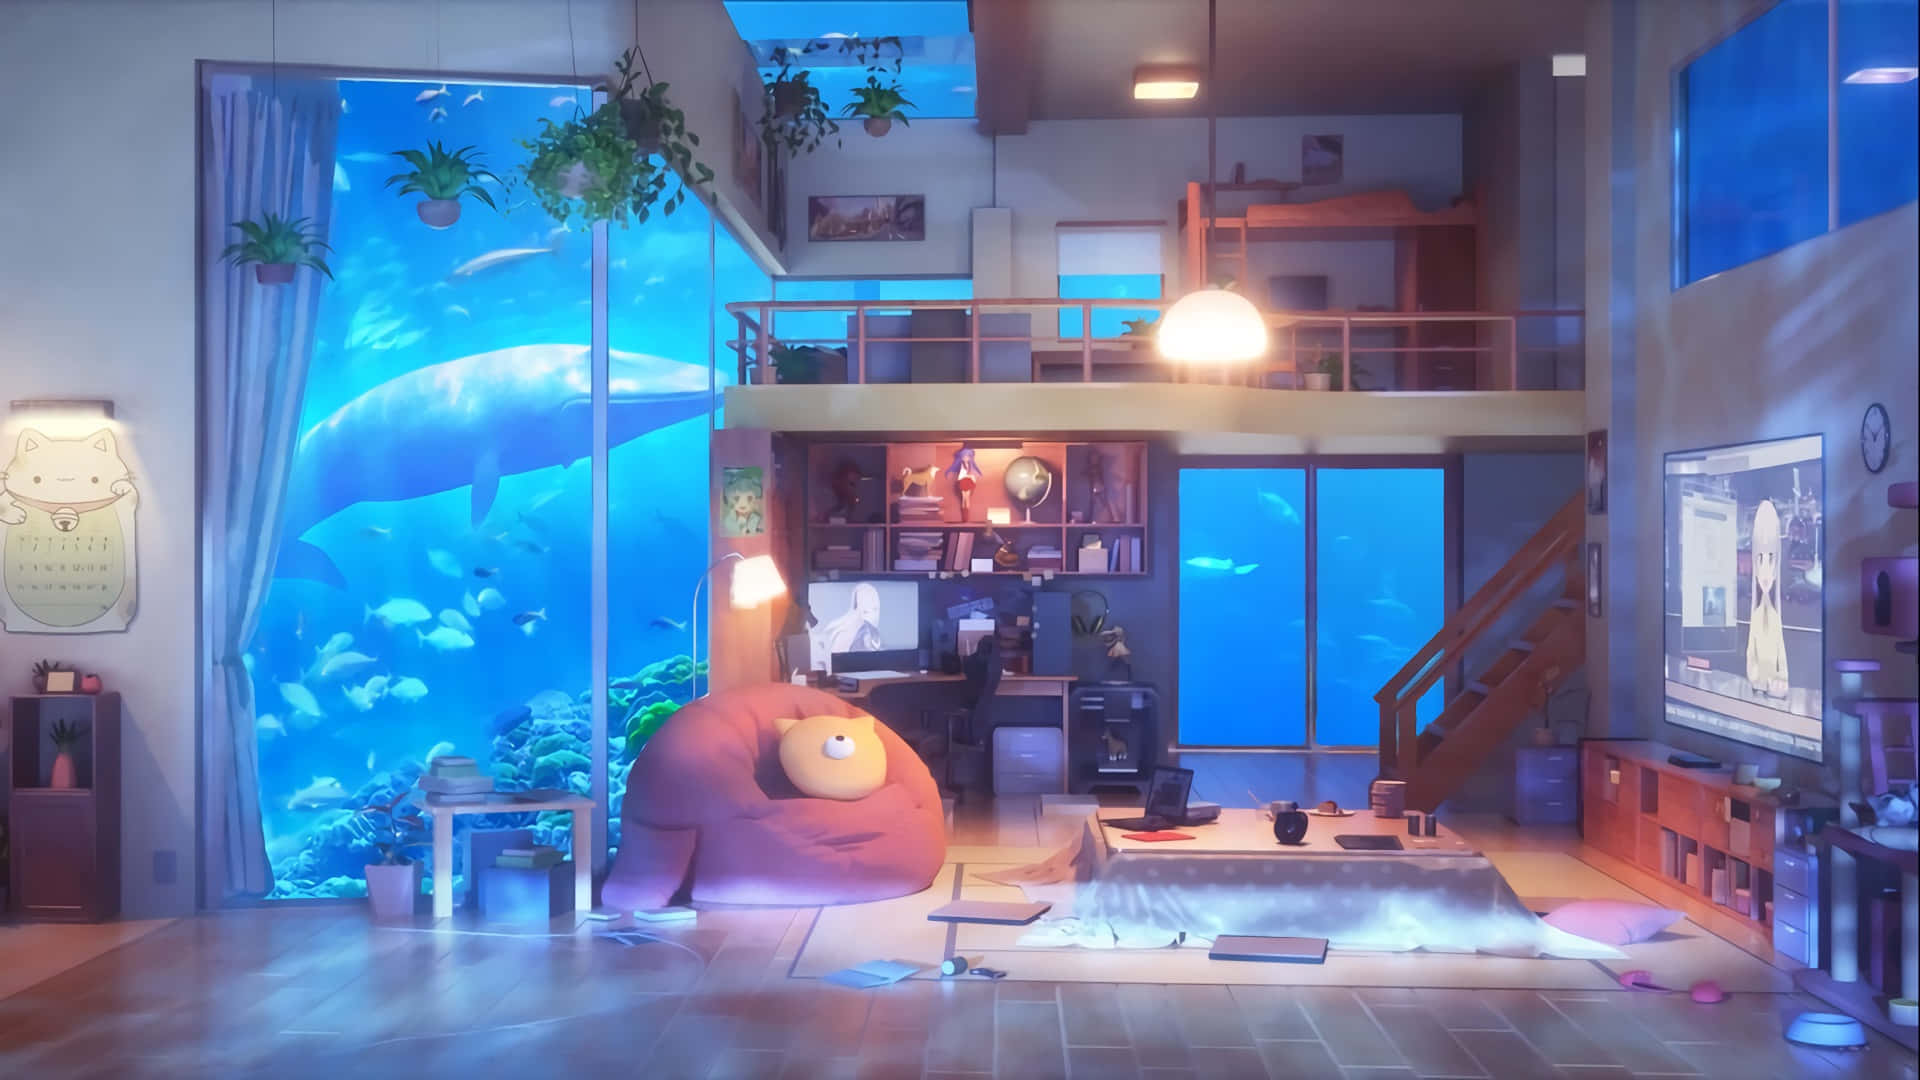 A Typical Anime Bedroom – A Place to Keep Your Dreams Alive